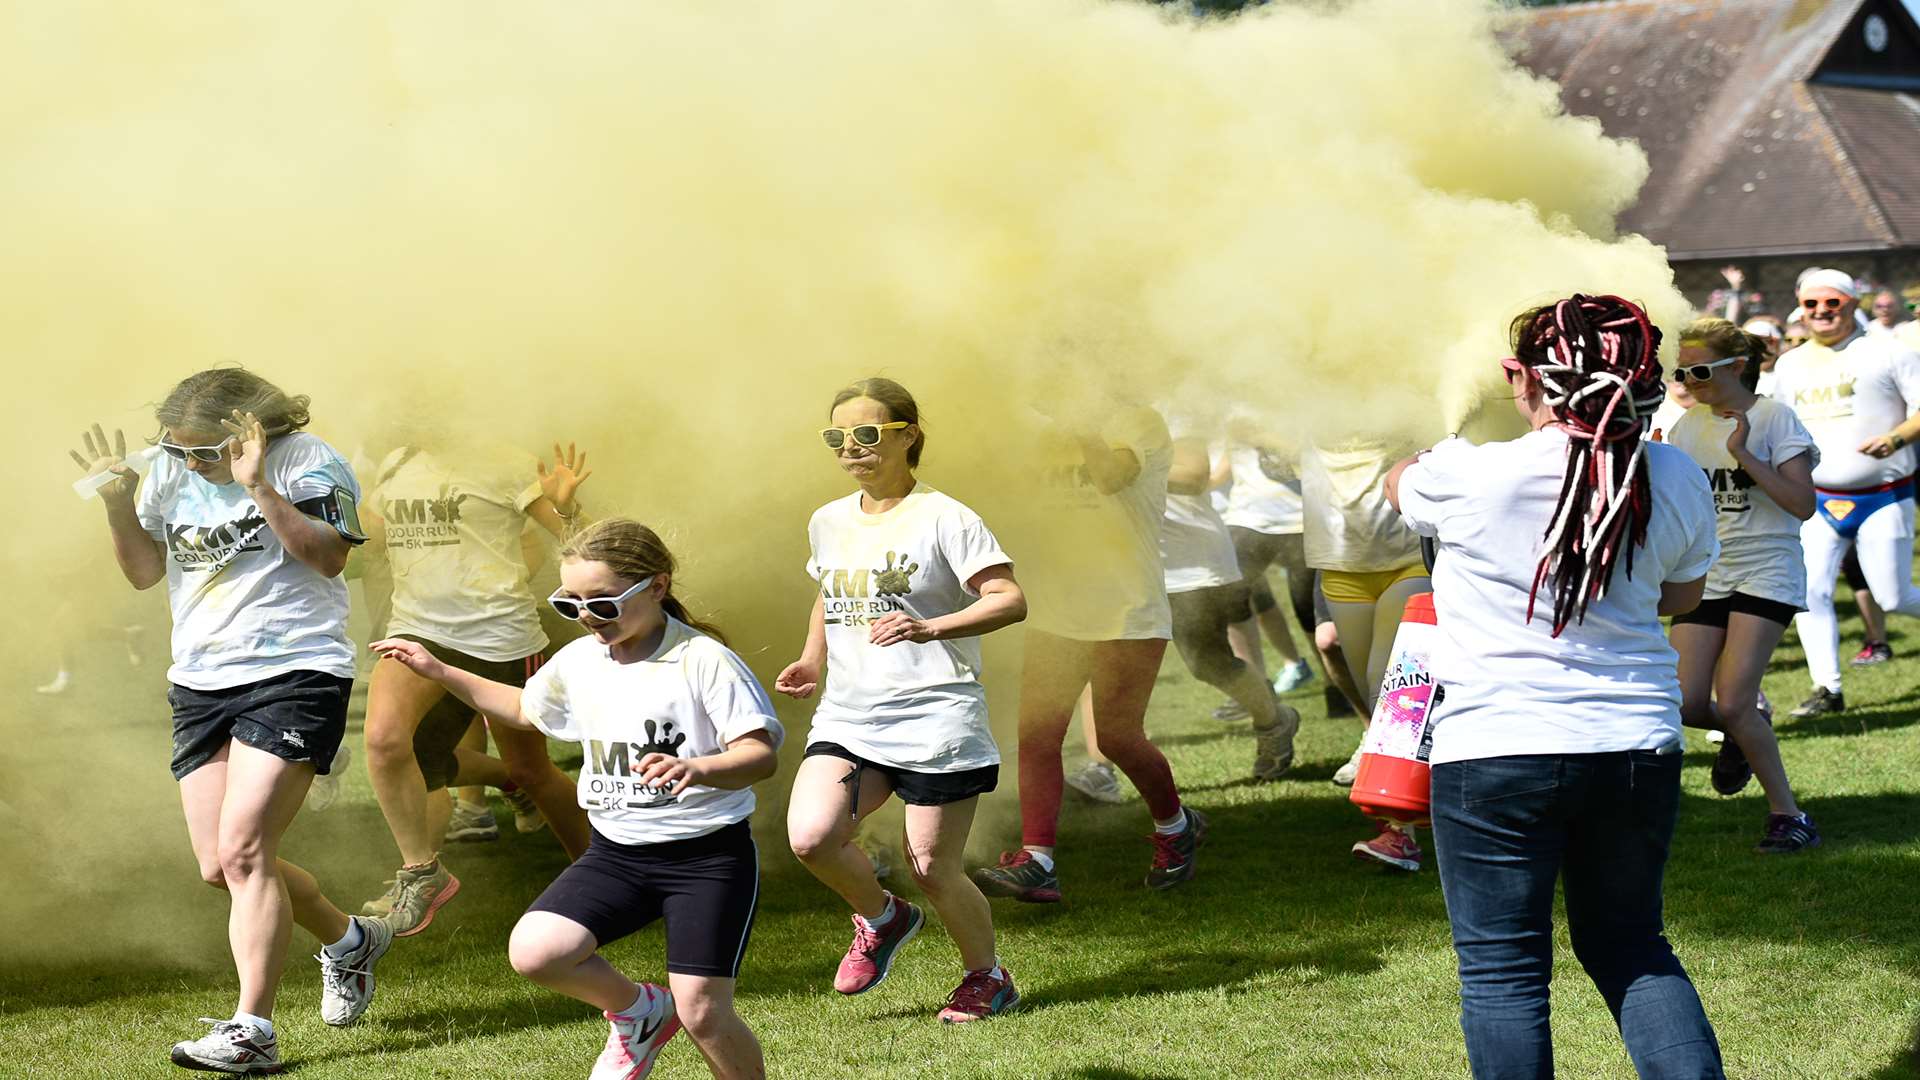 Take part in the 2016 KM Colour Run staged at Betteshanger Park, Nr Deal on Sunday, June 12. Booking is now open.